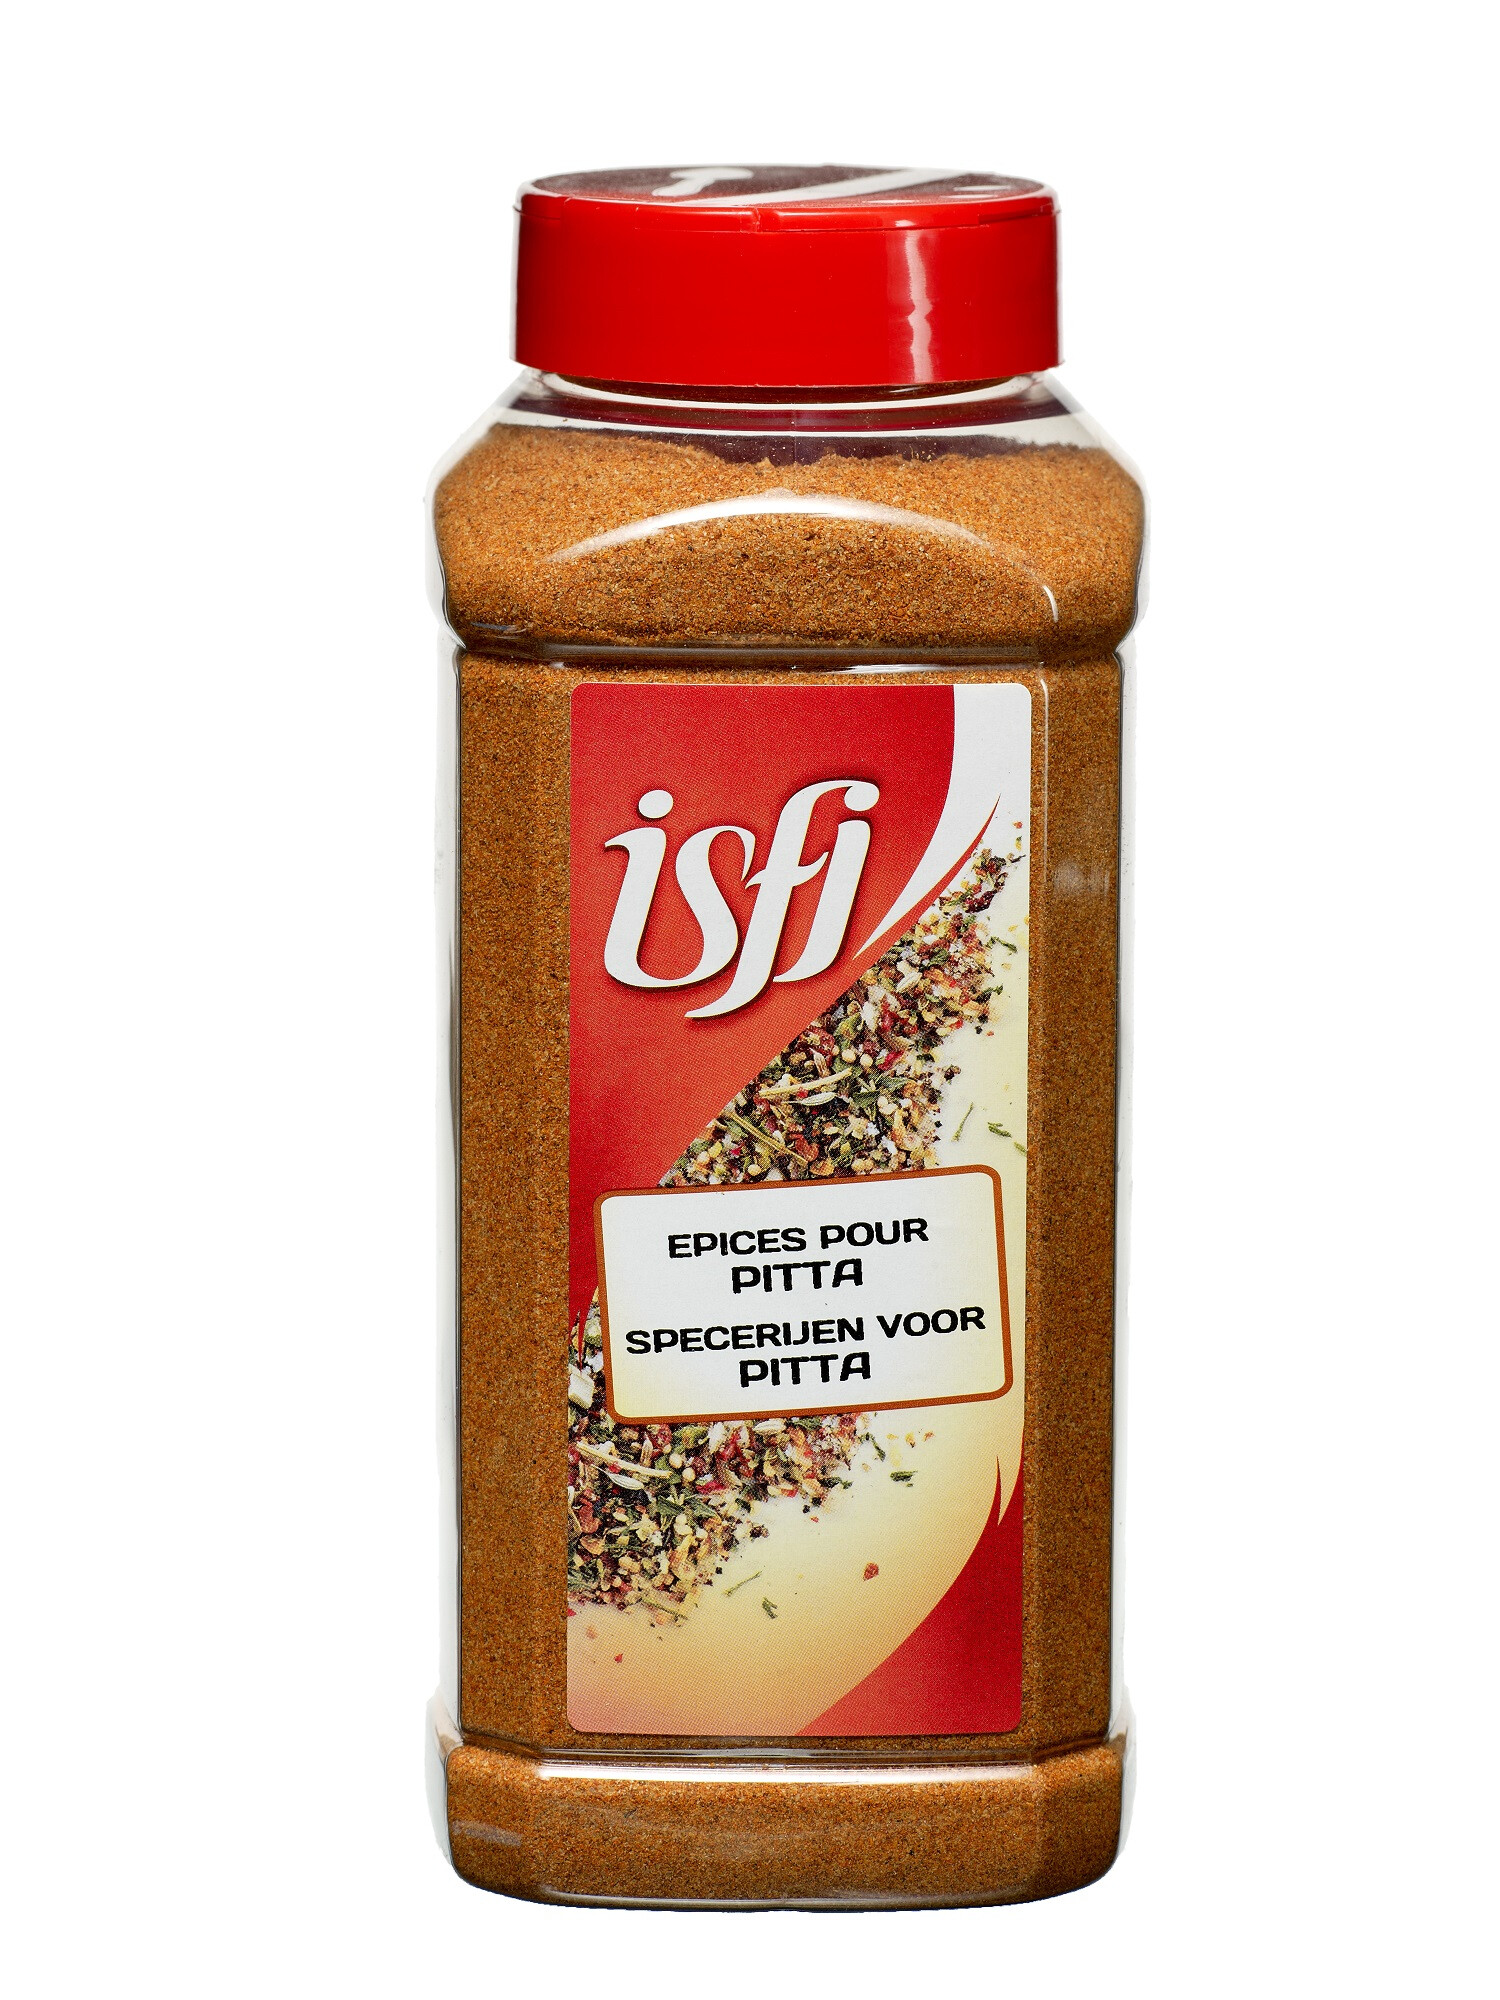 Spice Mix for Pitta 750g 1LP Isfi